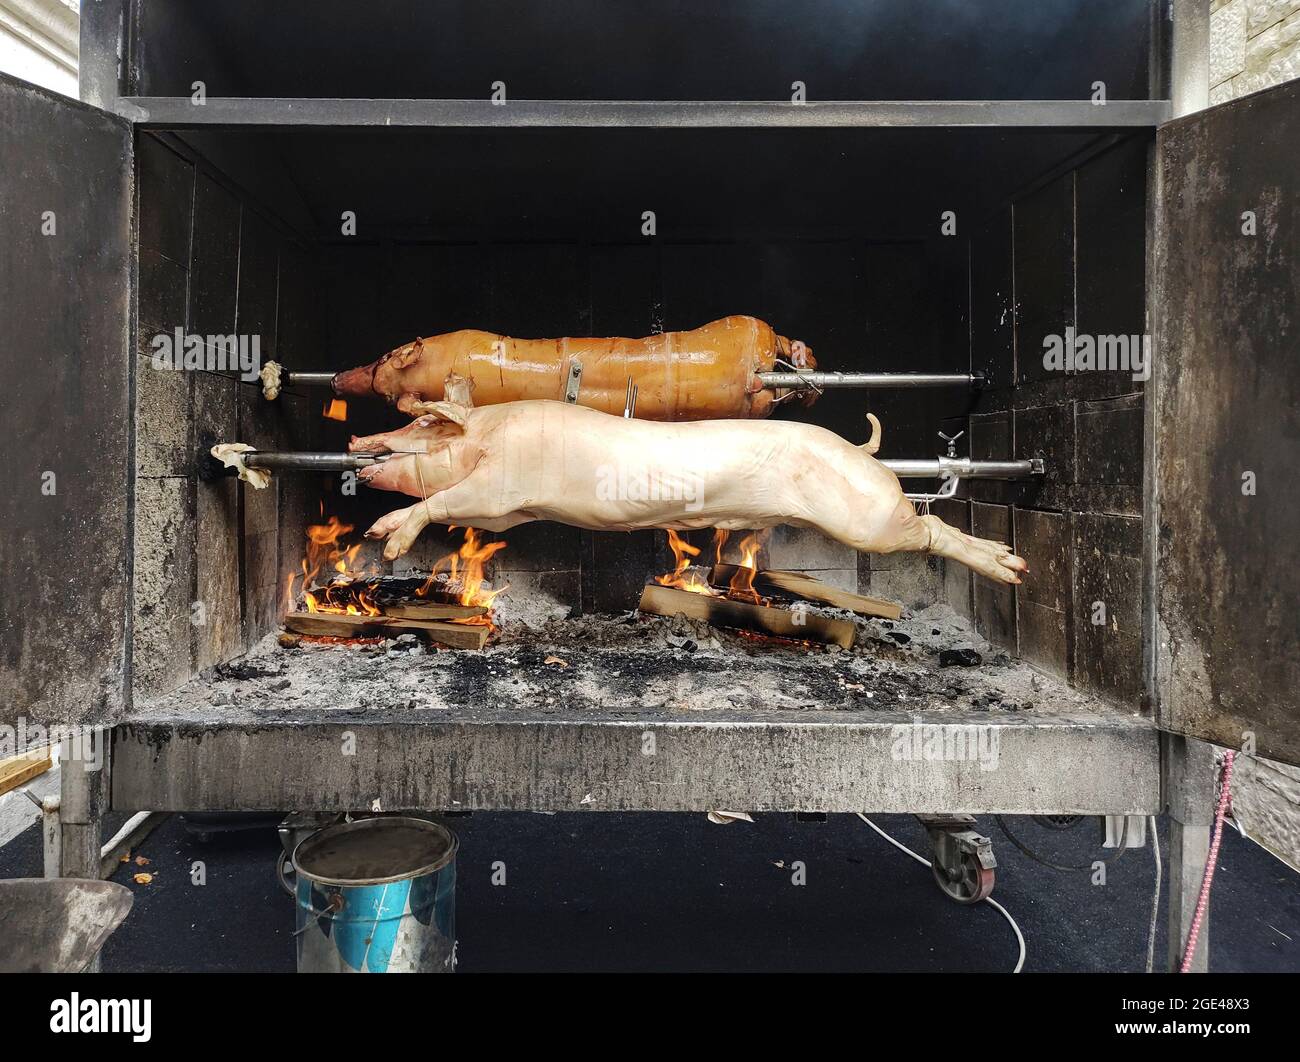 Porks grilling in a oven Stock Photo